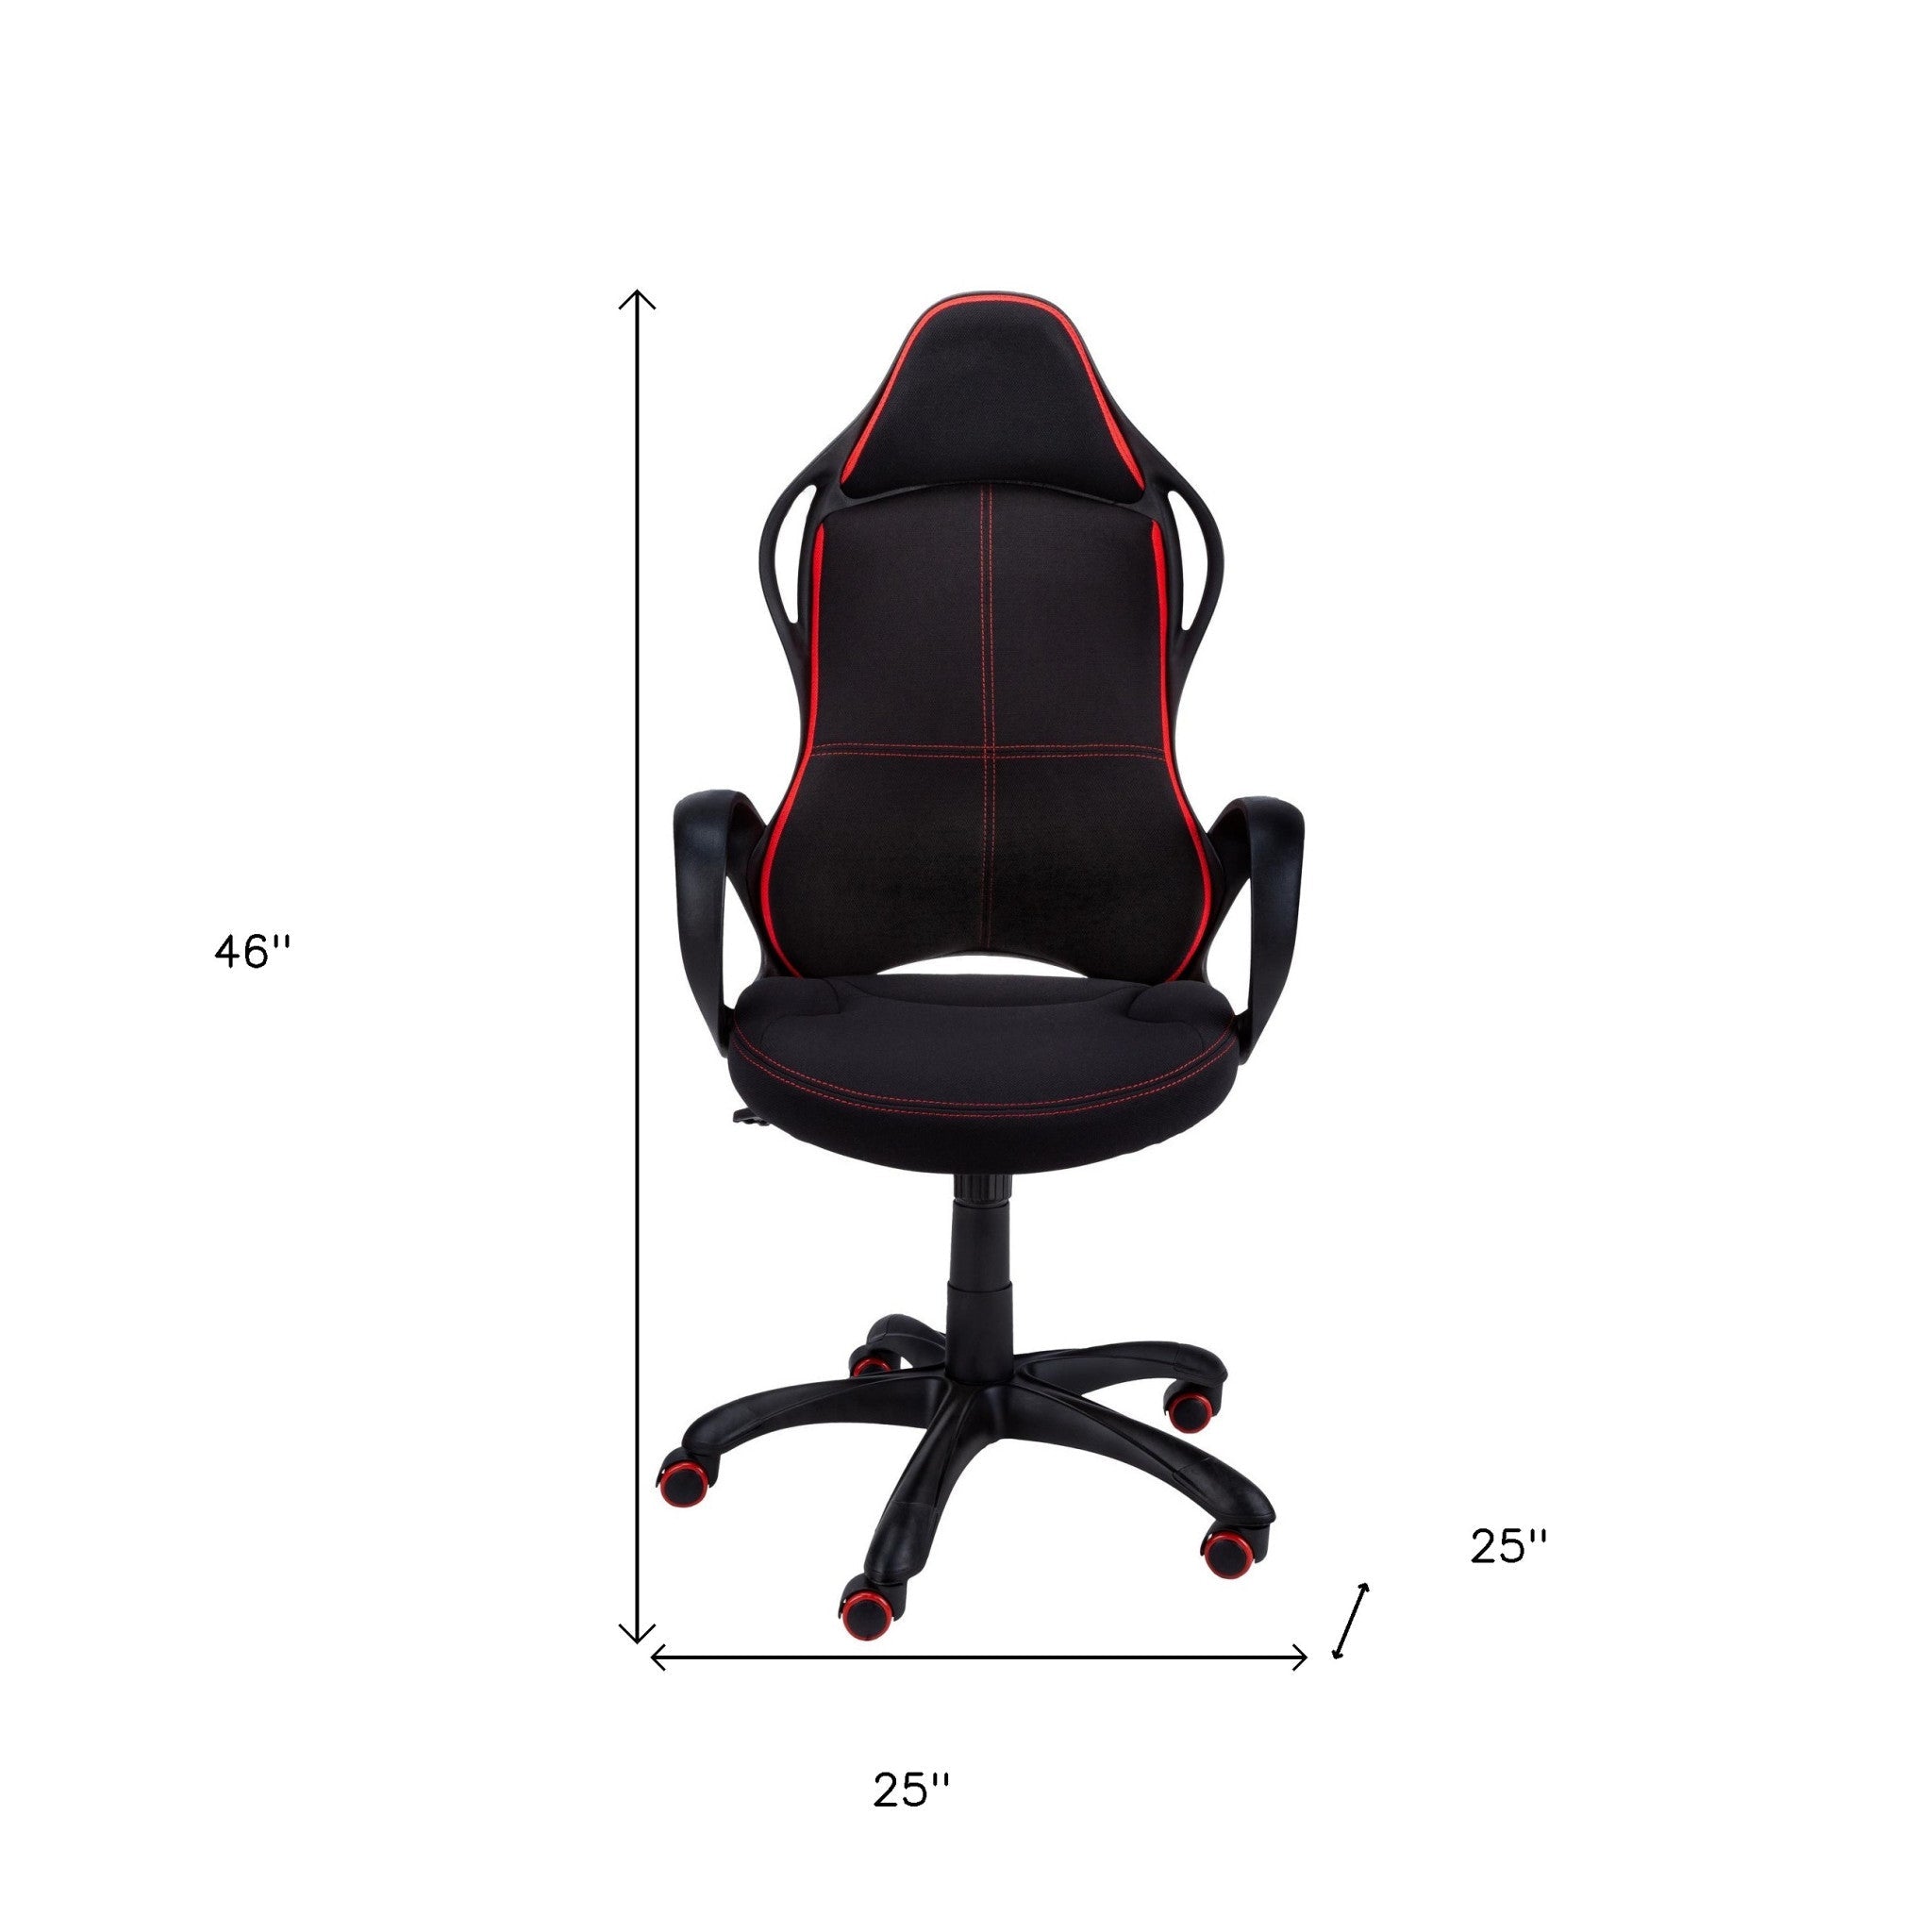 Black Fabric Tufted Seat Swivel Adjustable Gaming Chair Fabric Back Plastic Frame - Tuesday Morning-Office Chairs